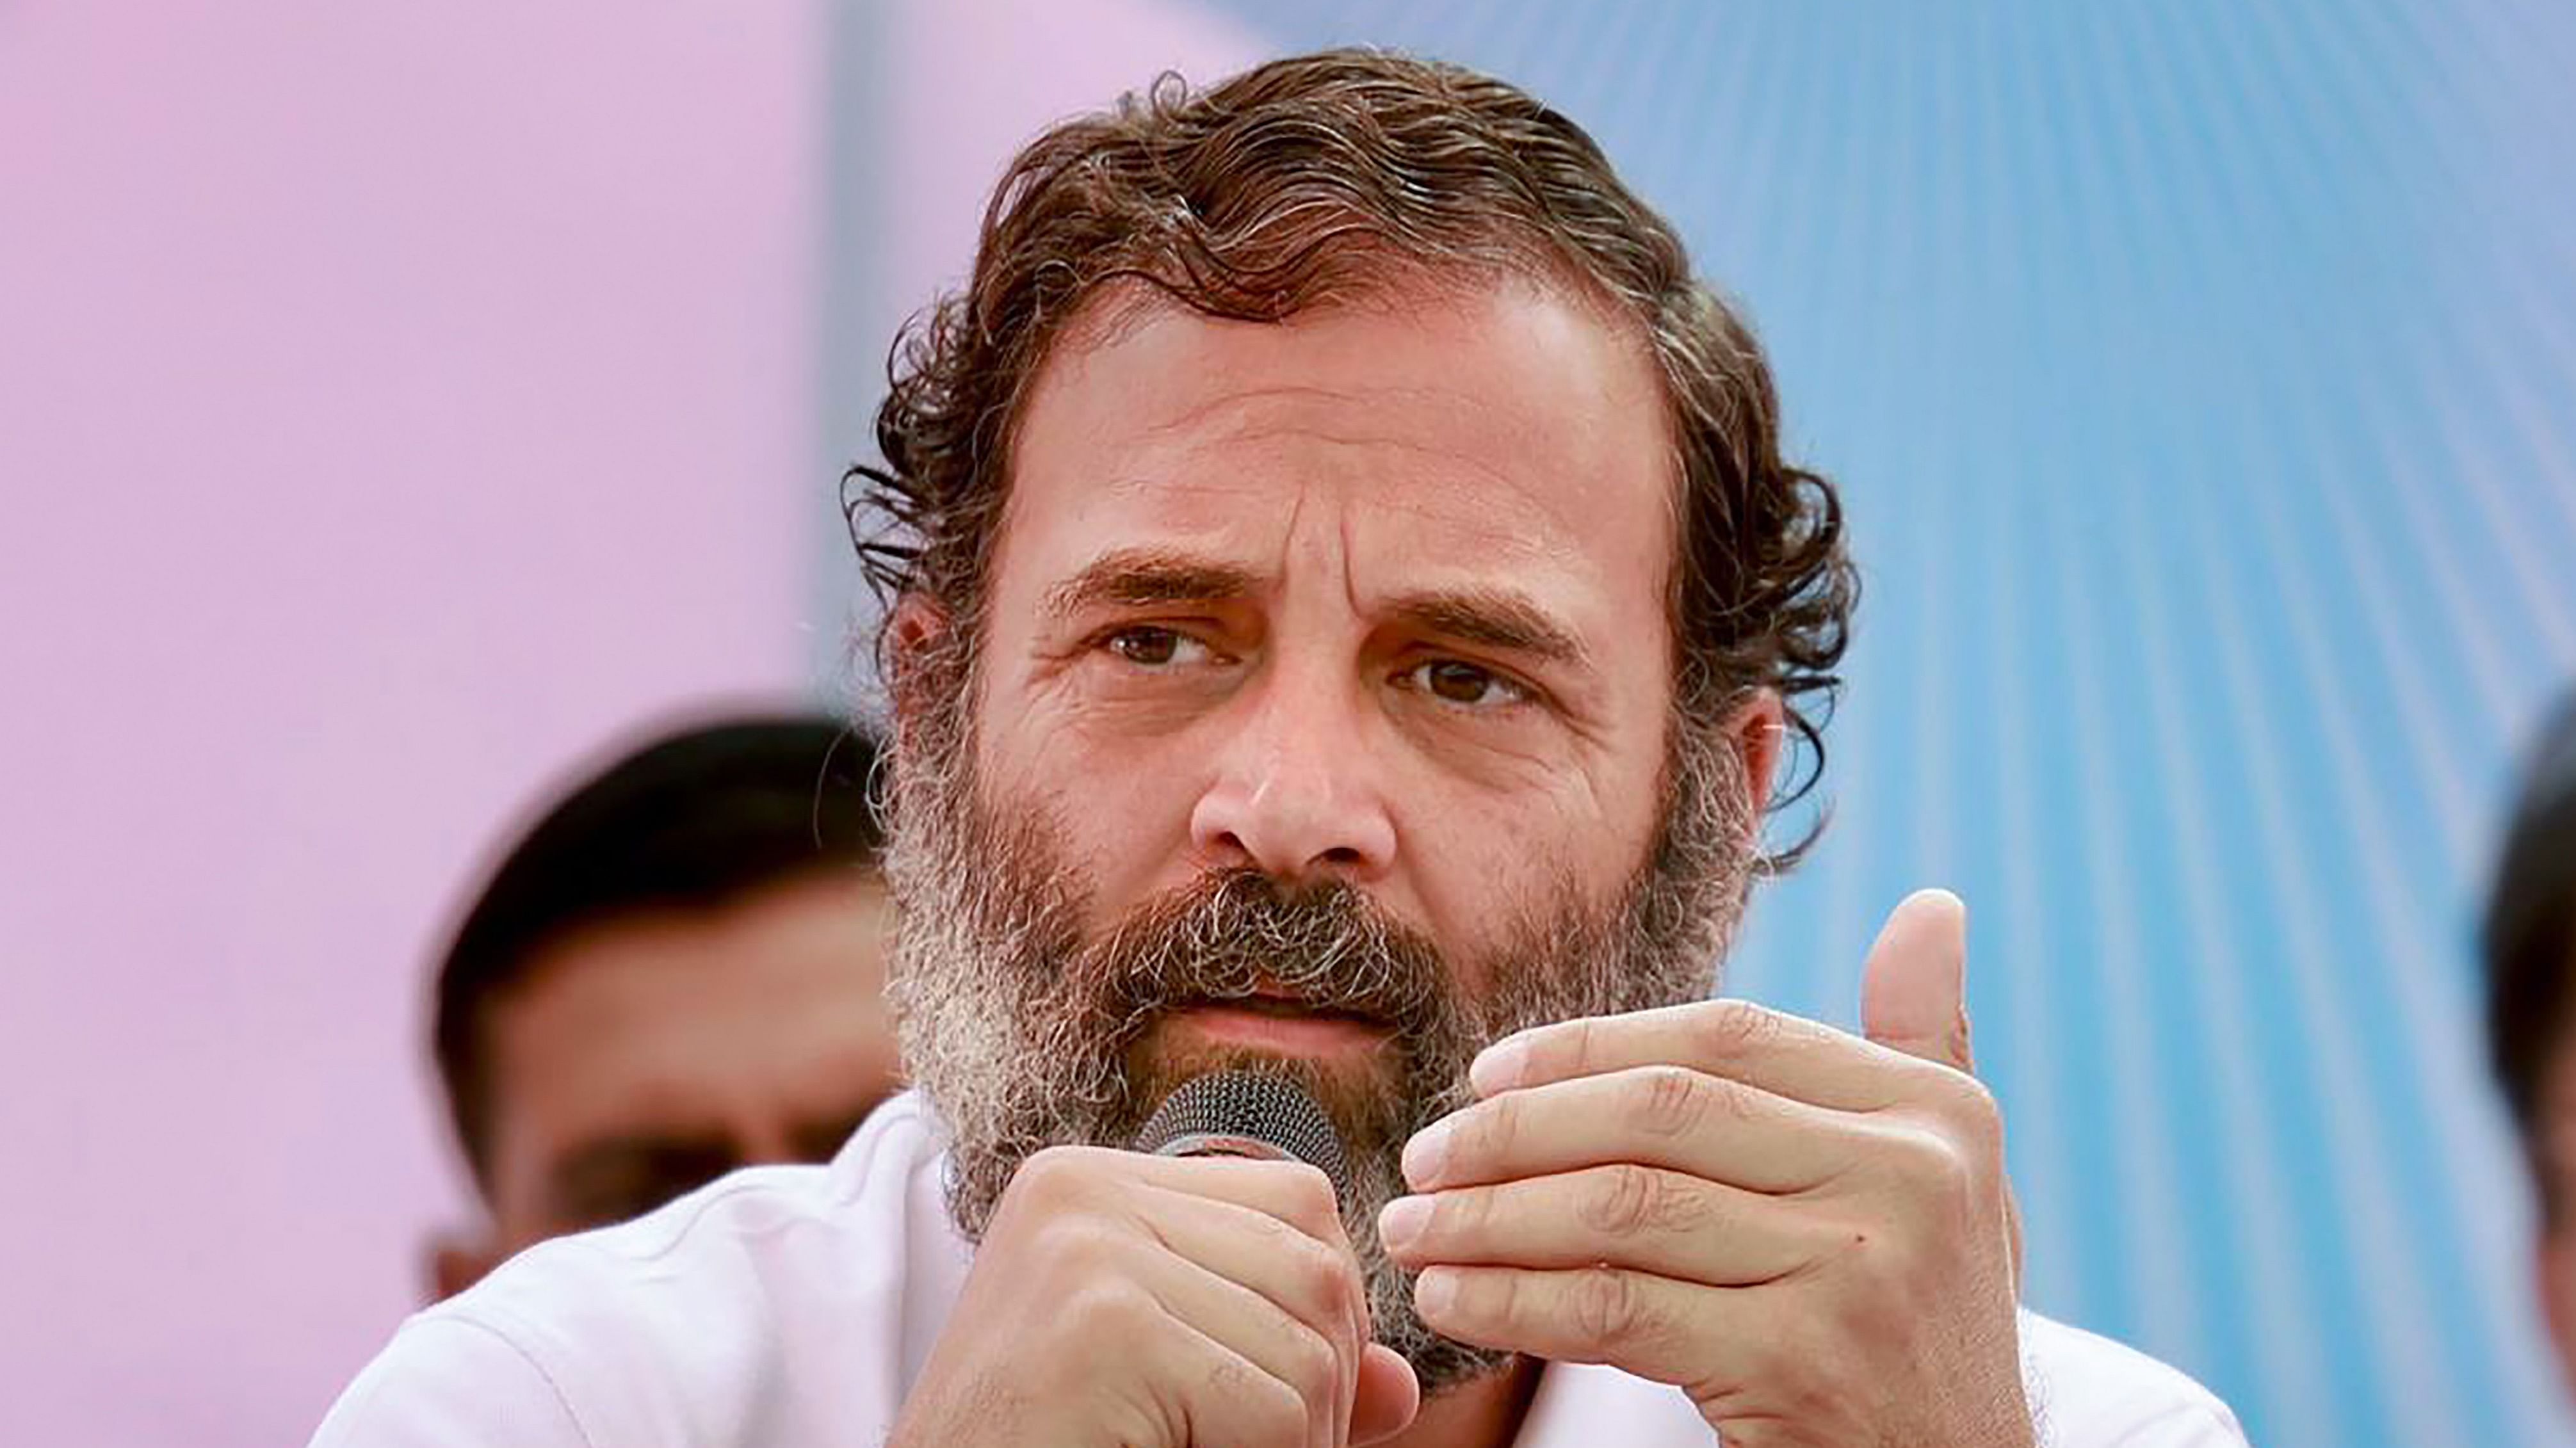 The incident, which occurred during the campaigning for the Gujarat Assembly polls, prompted Congress leader Rahul Gandhi to attack the BJP government with a jibe that the land of Mahatma Gandhi and Sardar Patel was "intoxicated". Credit: PTI Photo